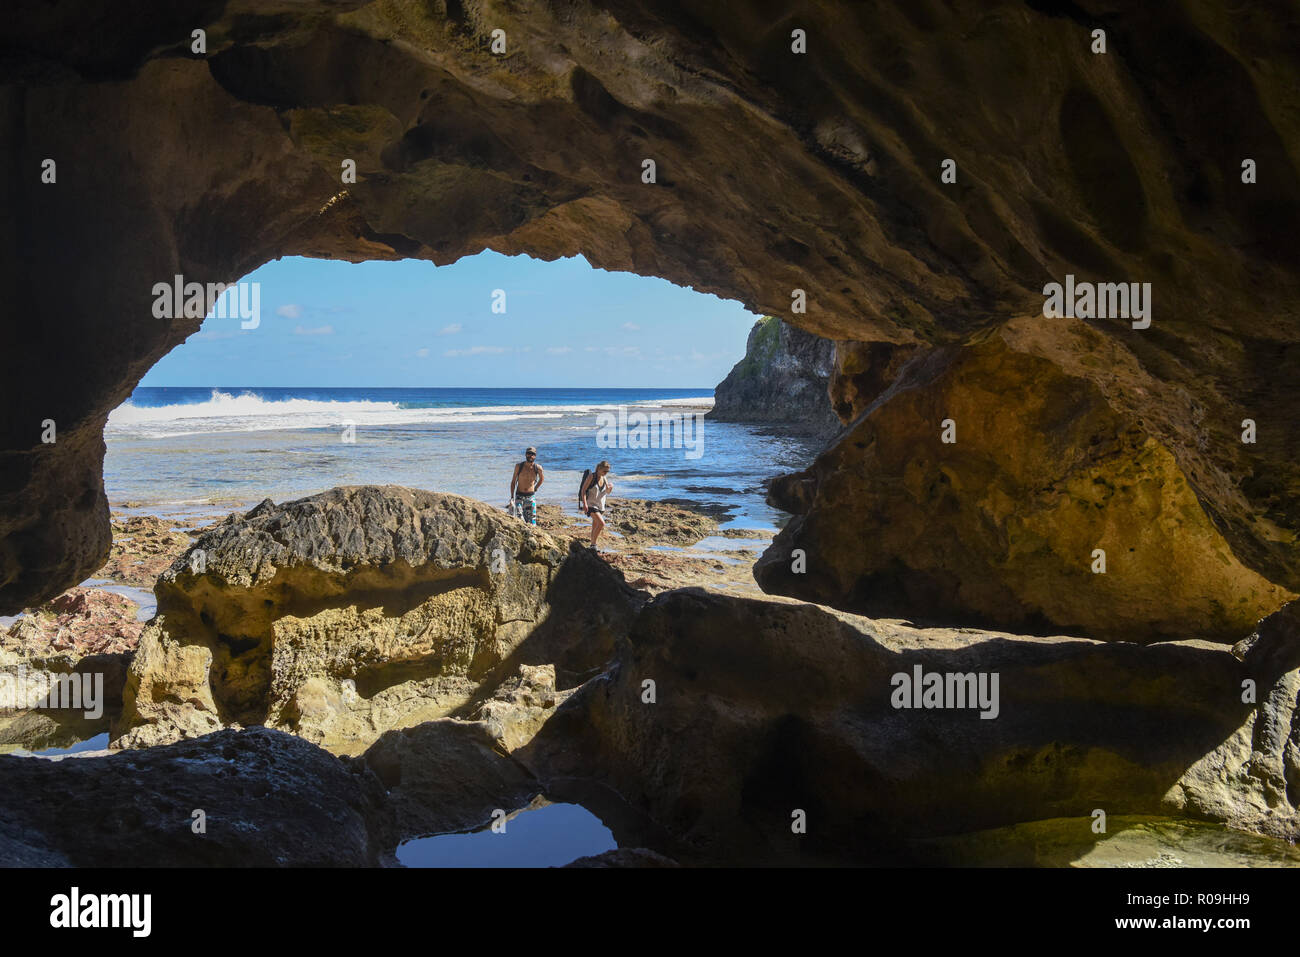 Alofi, Niue. 2nd Nov, 2018. Tourists walk by the Avaiki cave, in Niue, on Nov. 2, 2018. Niue, as referred to 'the Rock', is one of the biggest coral islands on the planet with dramatic cliffs, interesting caves and chasms that are teeming with marine life. Visitors can enjoy snorkelling, diving, and whale watching trips. Credit: Guo Lei/Xinhua/Alamy Live News Stock Photo